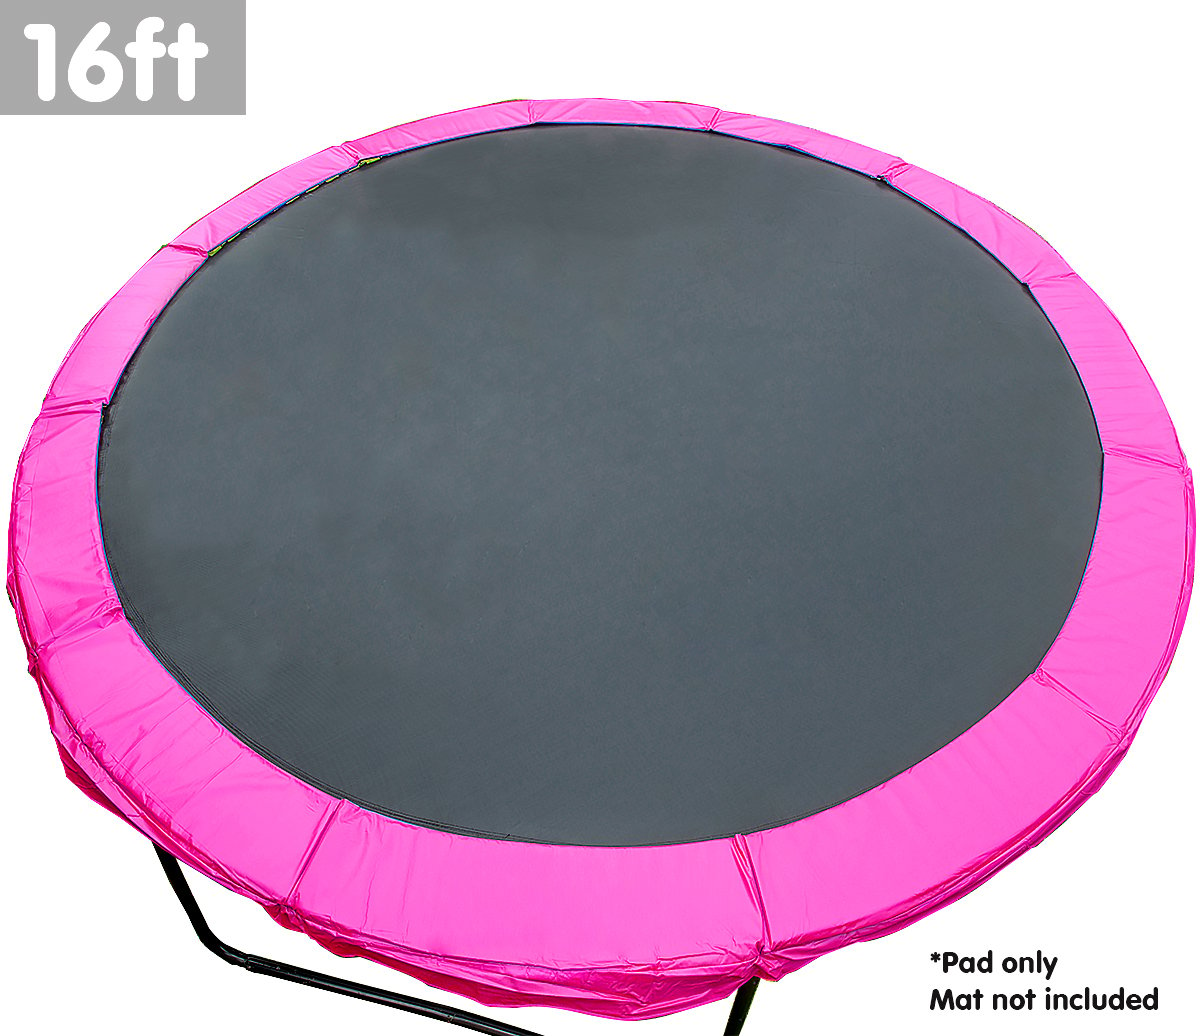 Kahuna 16ft Trampoline Replacement Pad Round - Pink